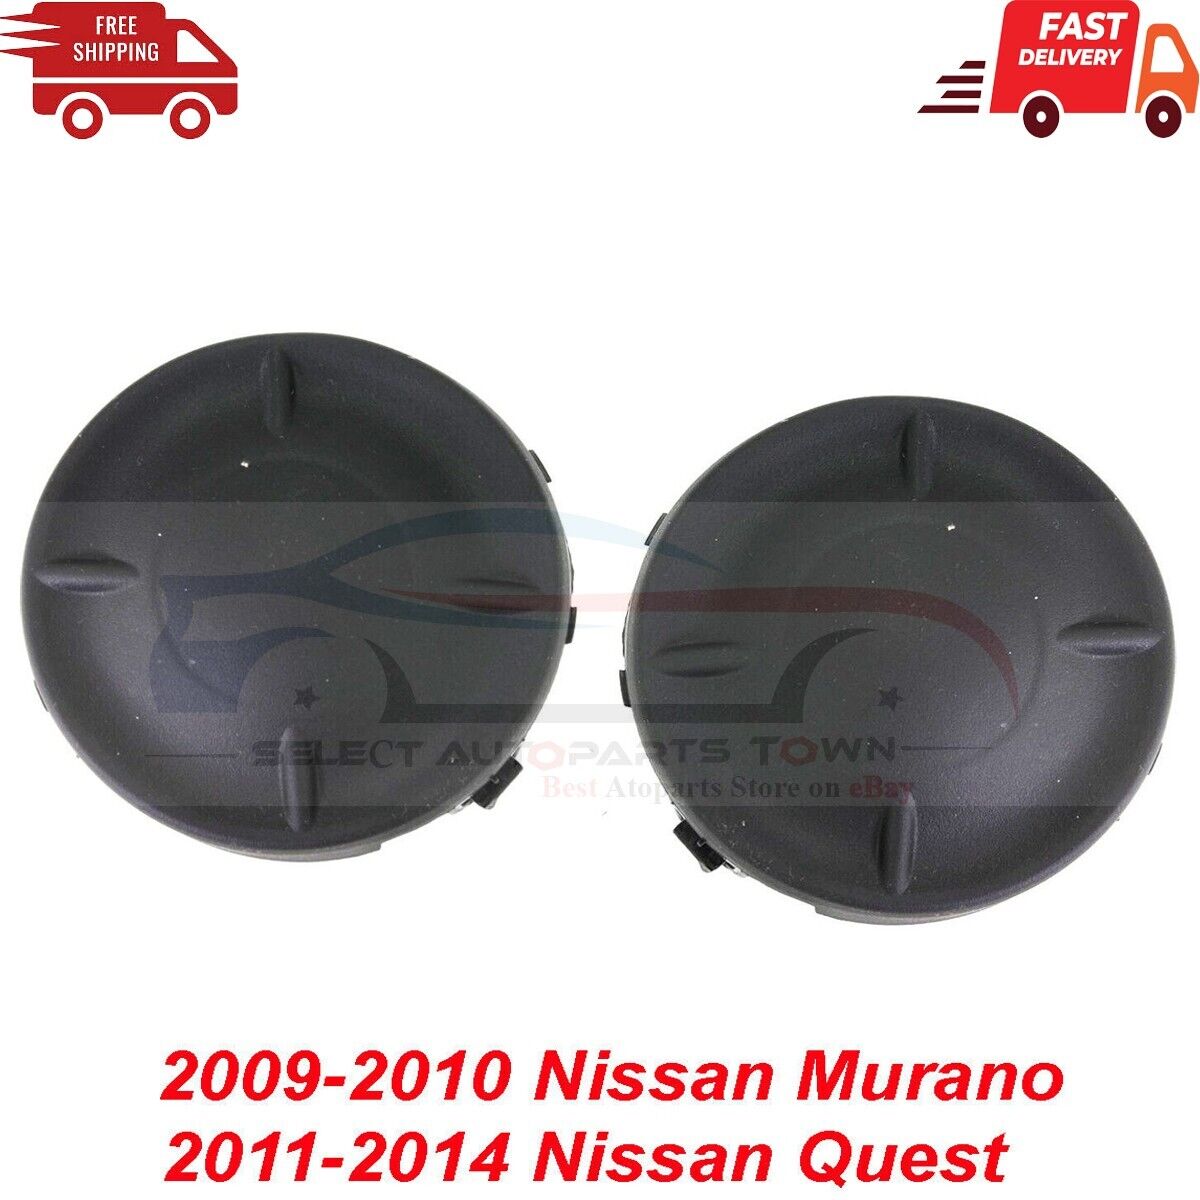 New Fits 11-14 Nissan Quest Fog Light Covers Front Left & Right Side Set of 2pc